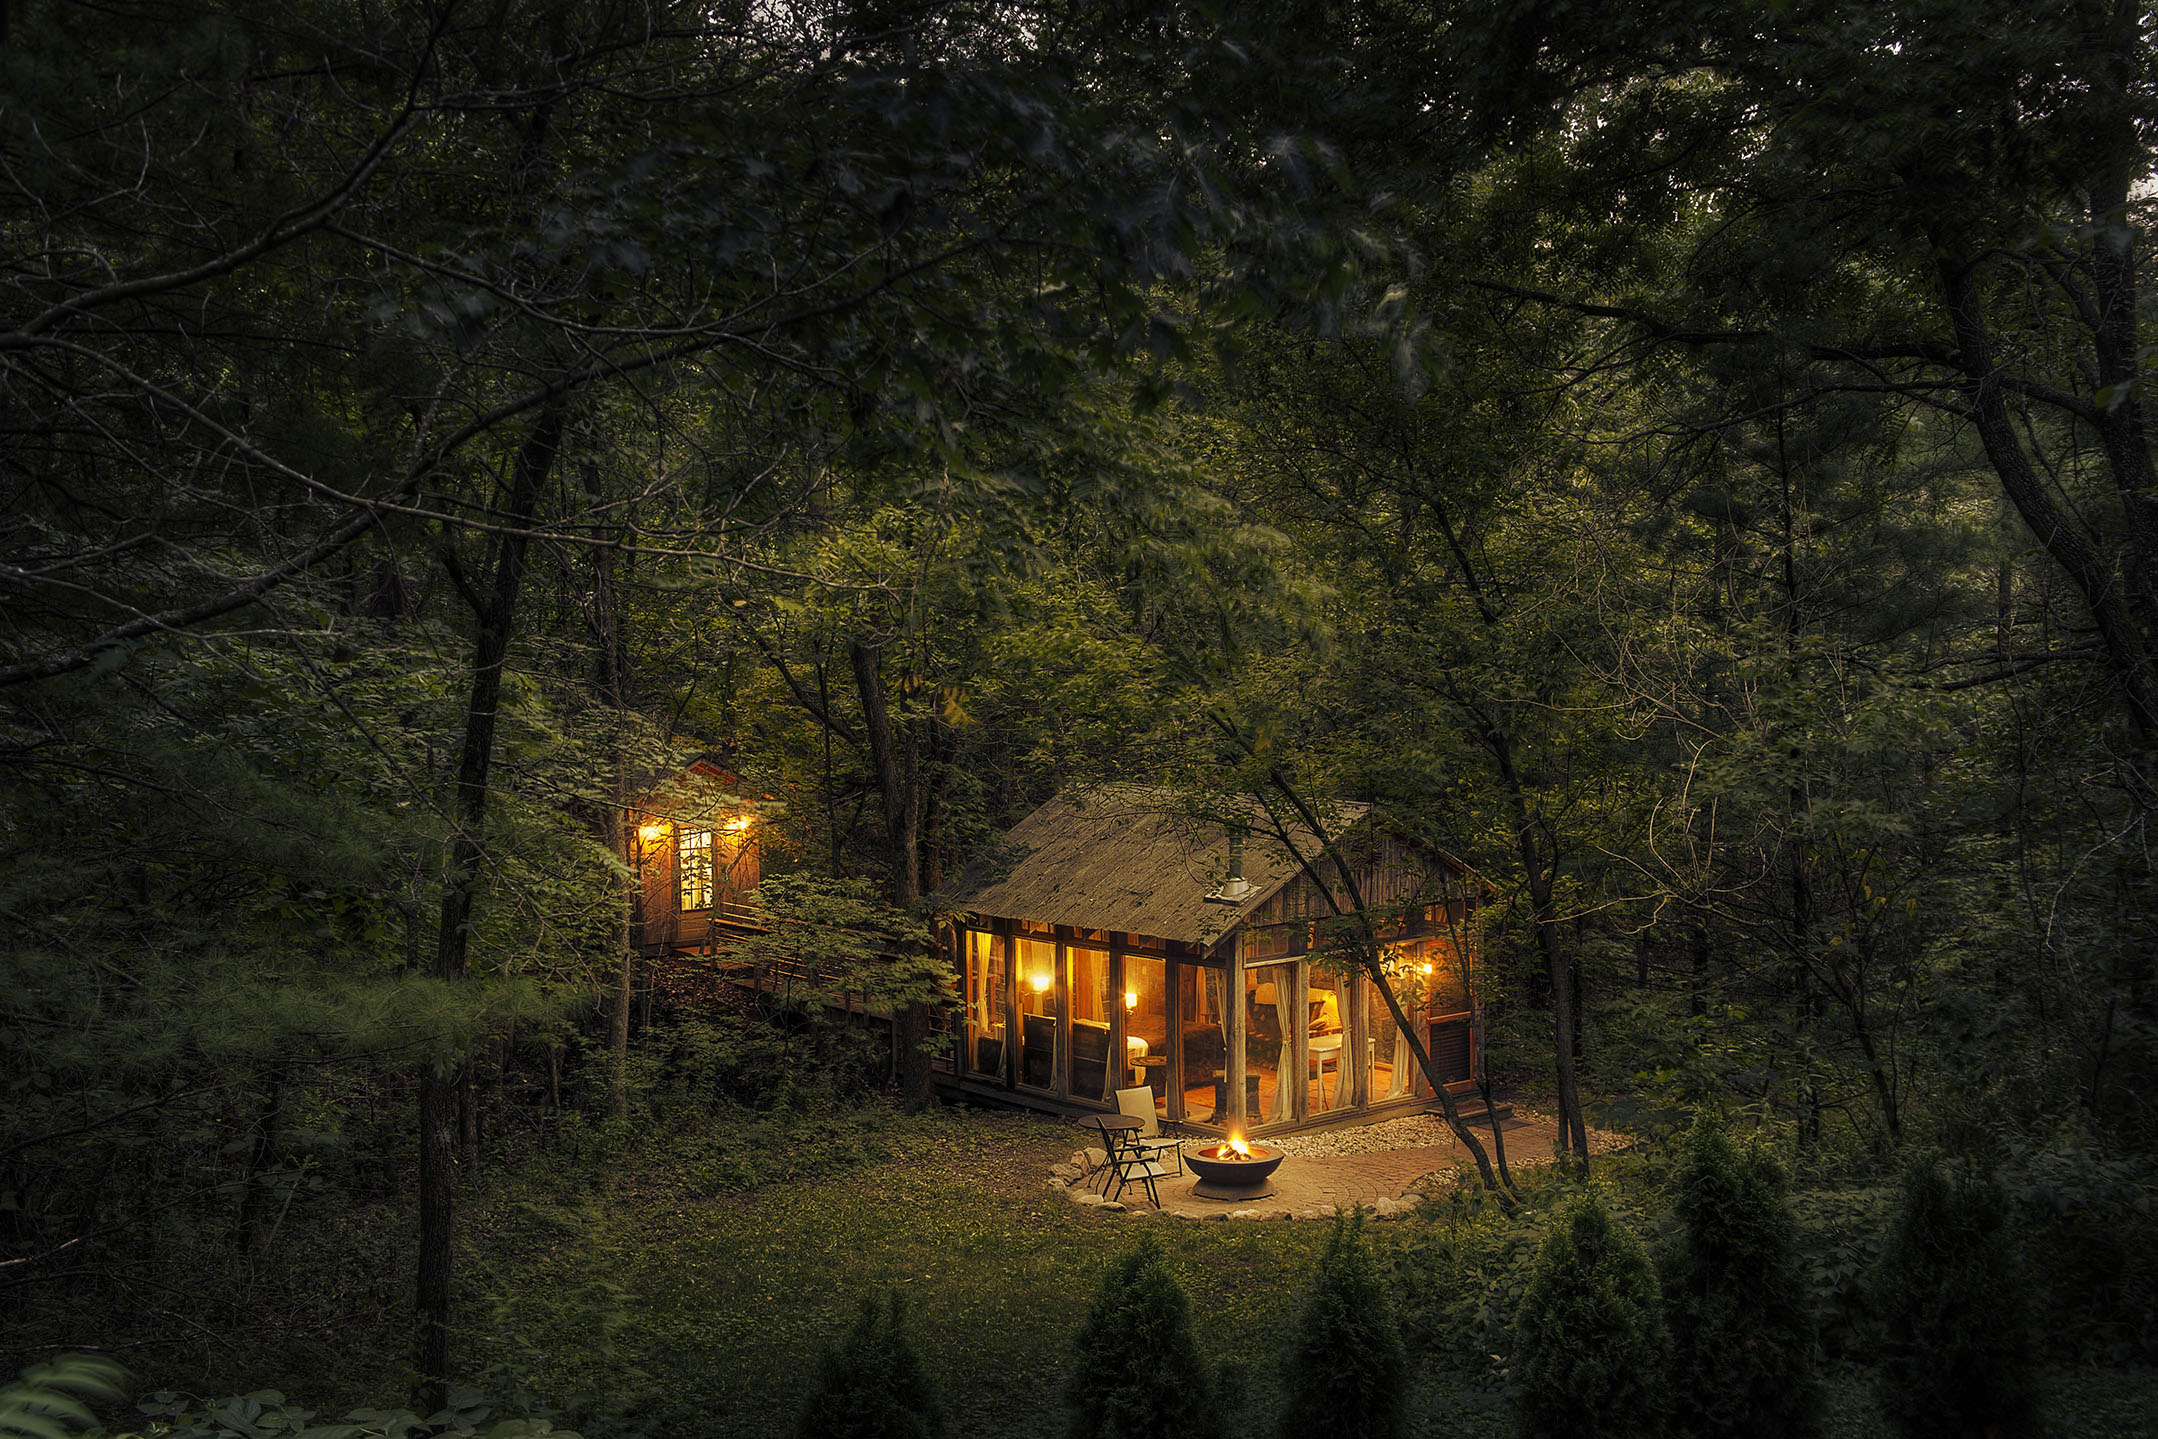 Candlewood Cabins